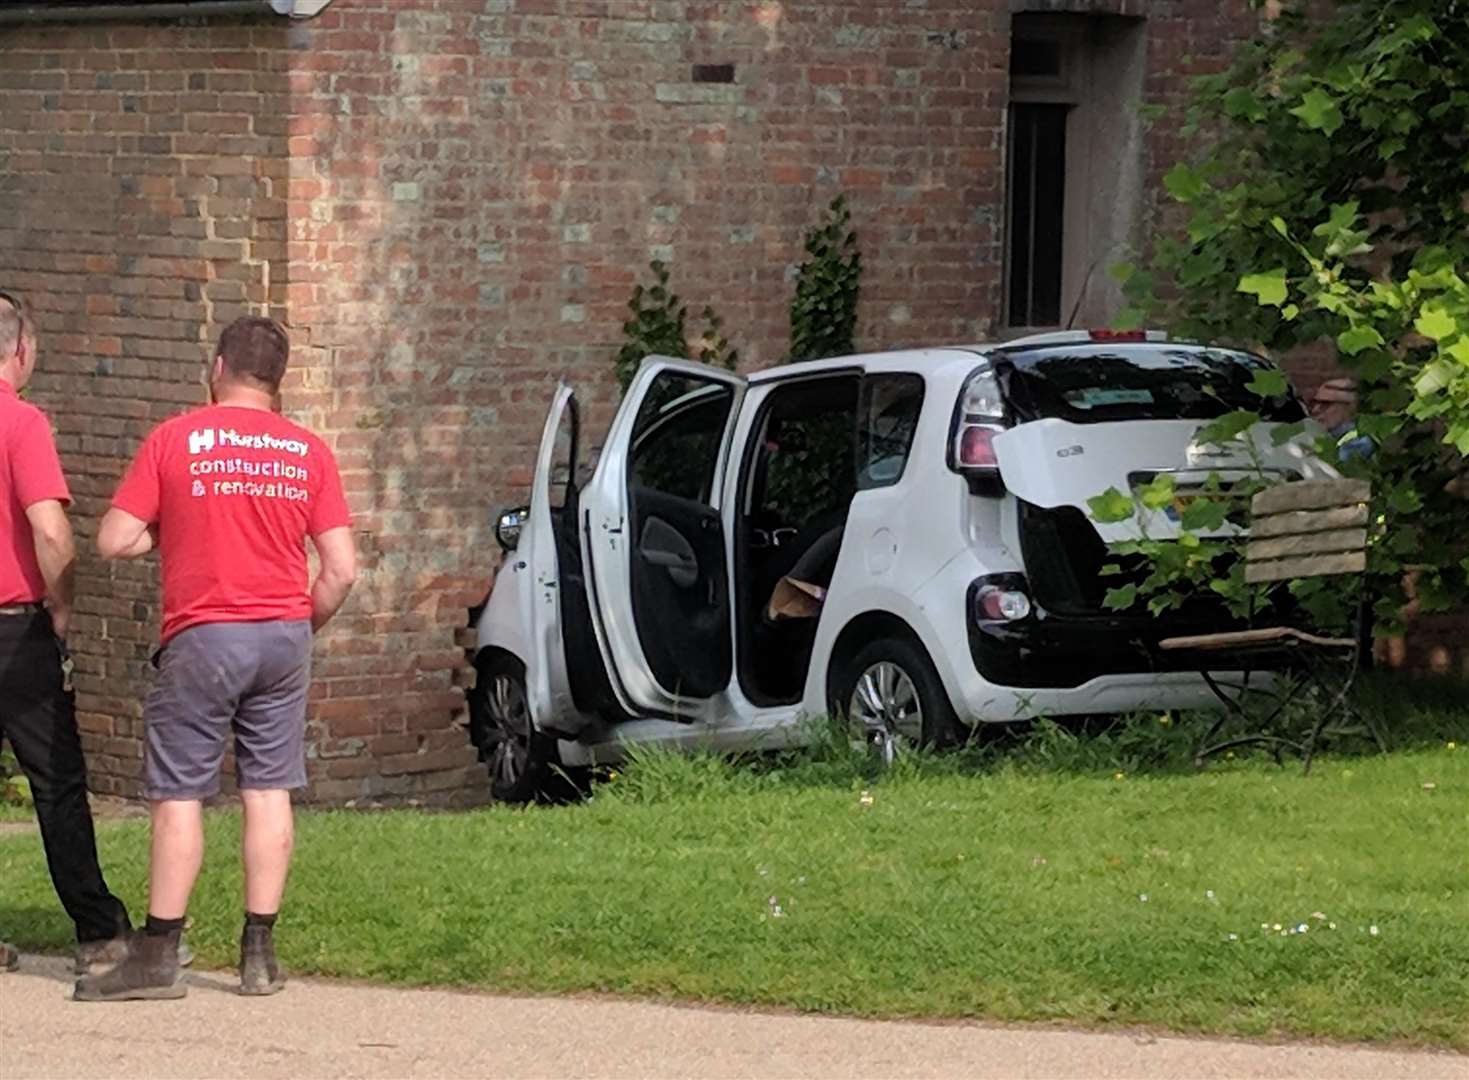 A car has crashed into the Scotney Castle tea room in Lamberhurst